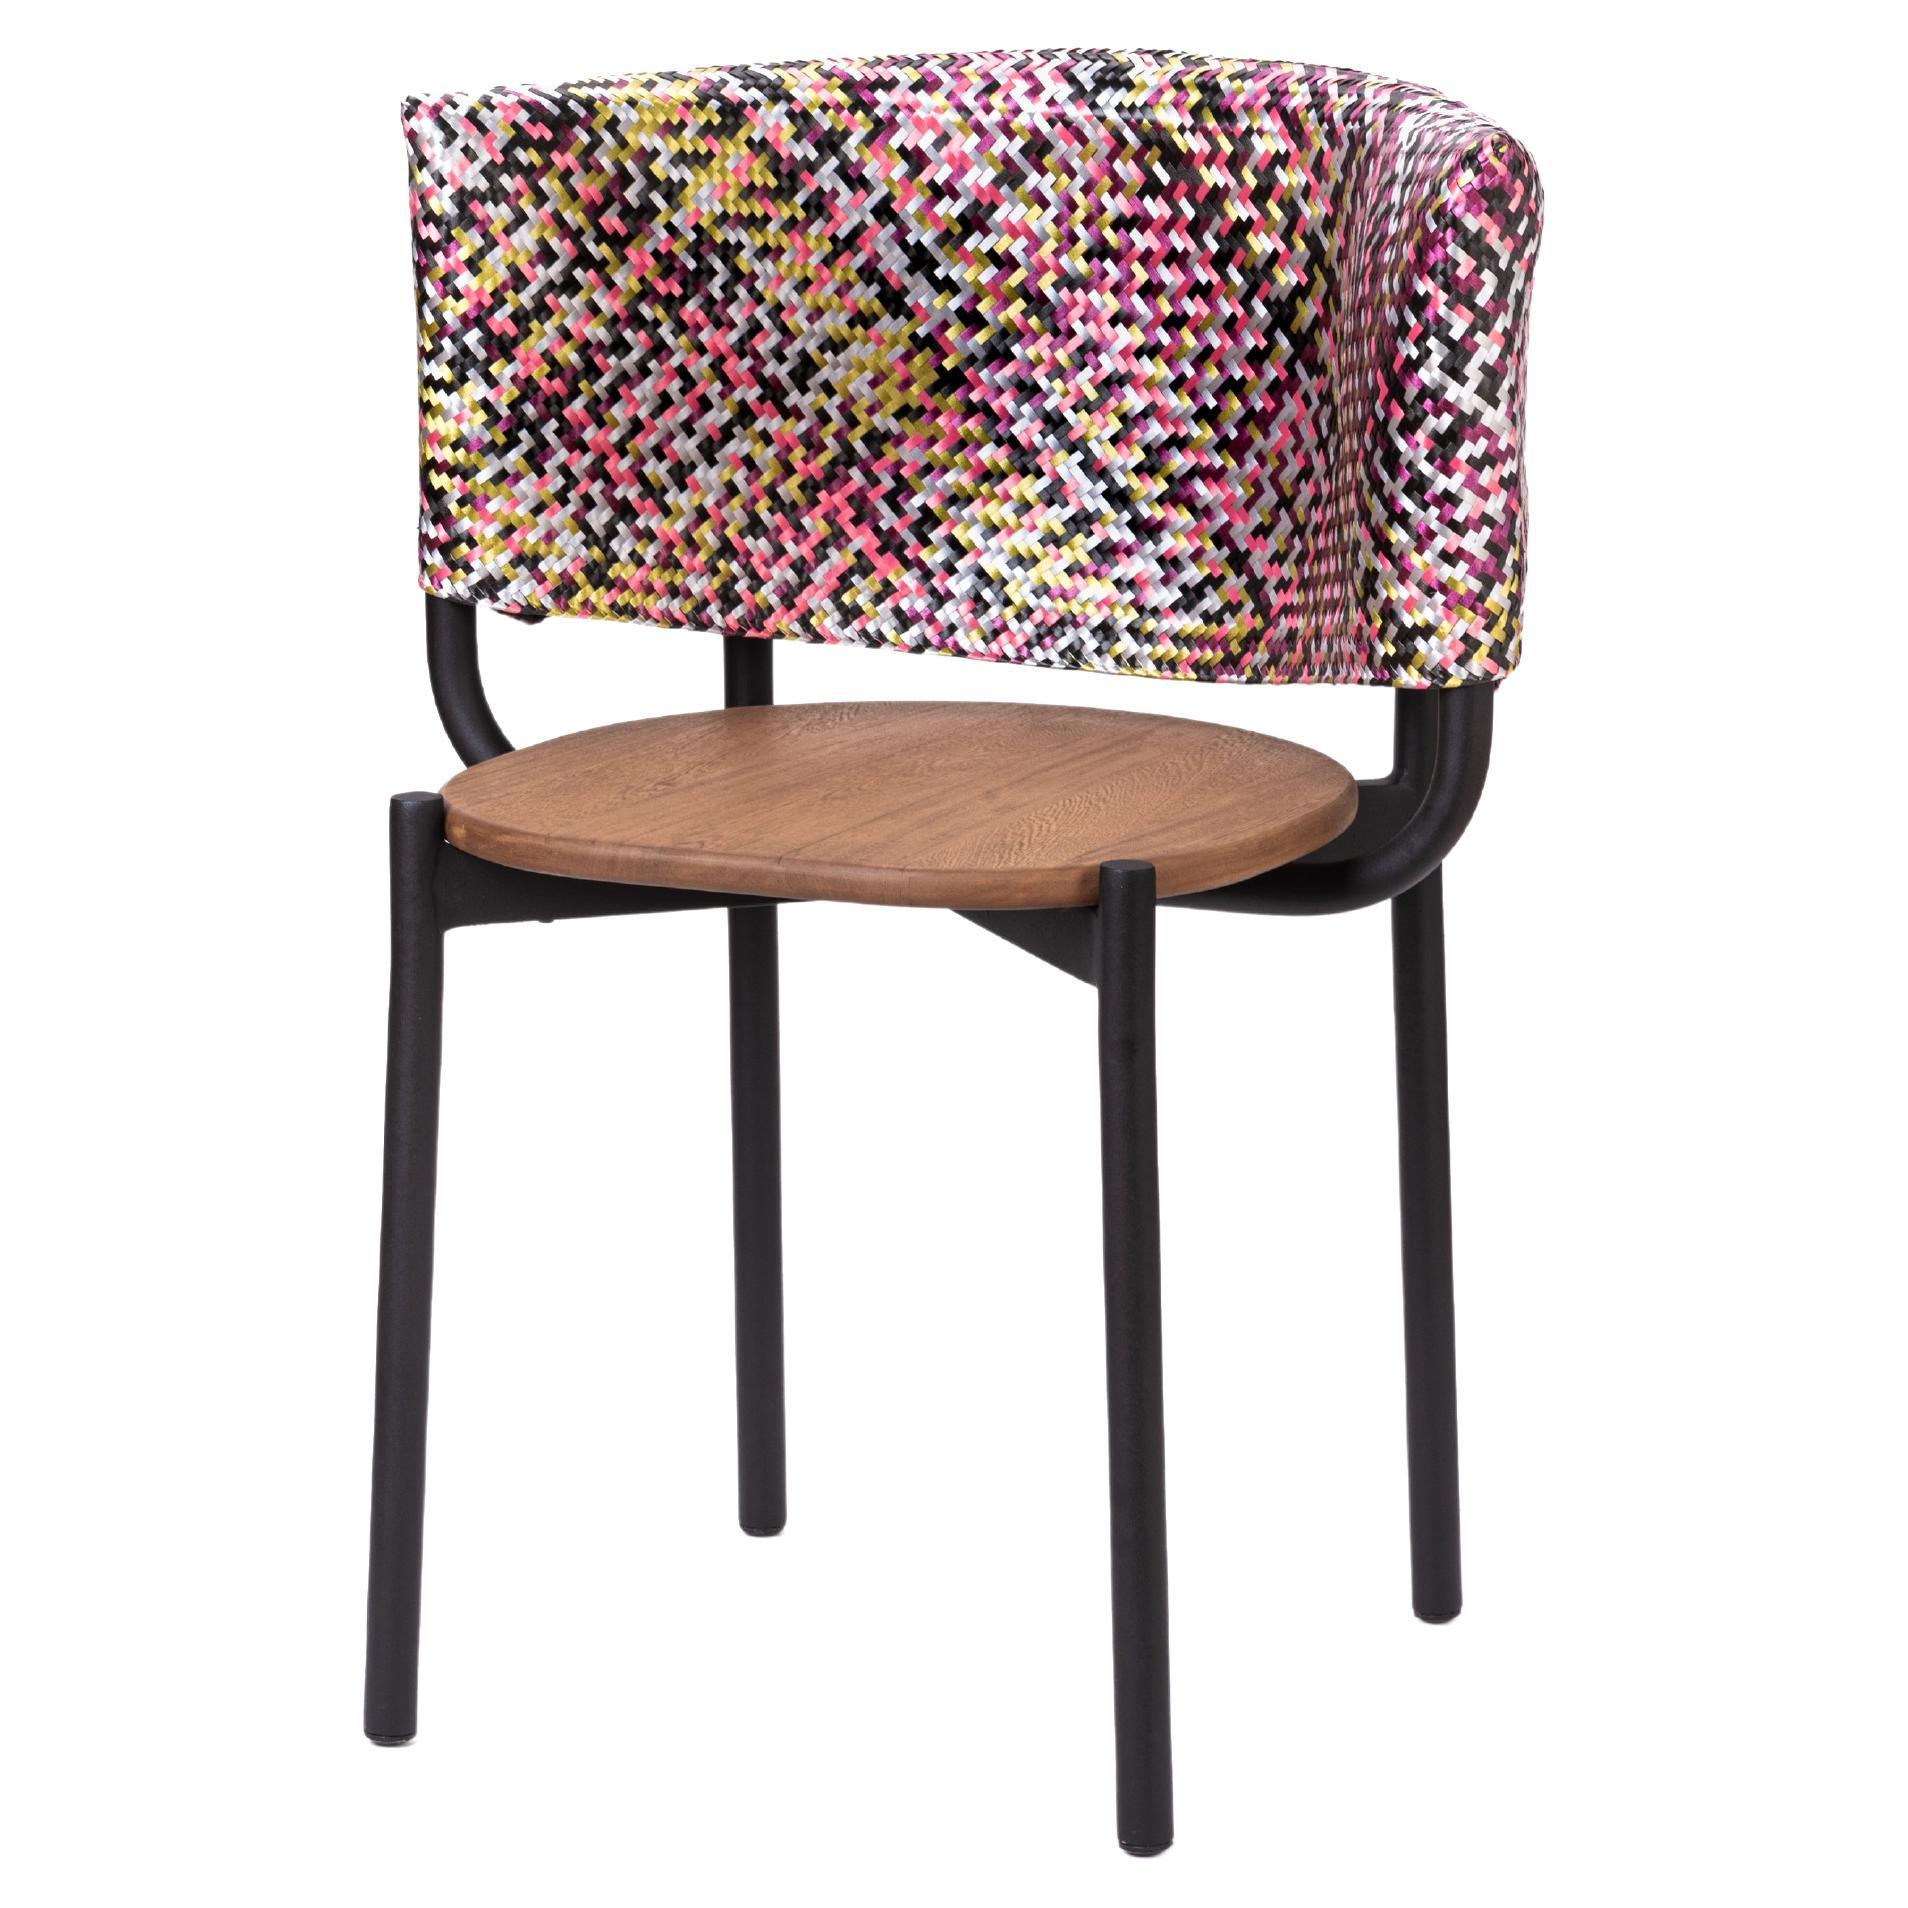 Black Outdoor Chair with Handmade Synthetic Fiber Weaving Back